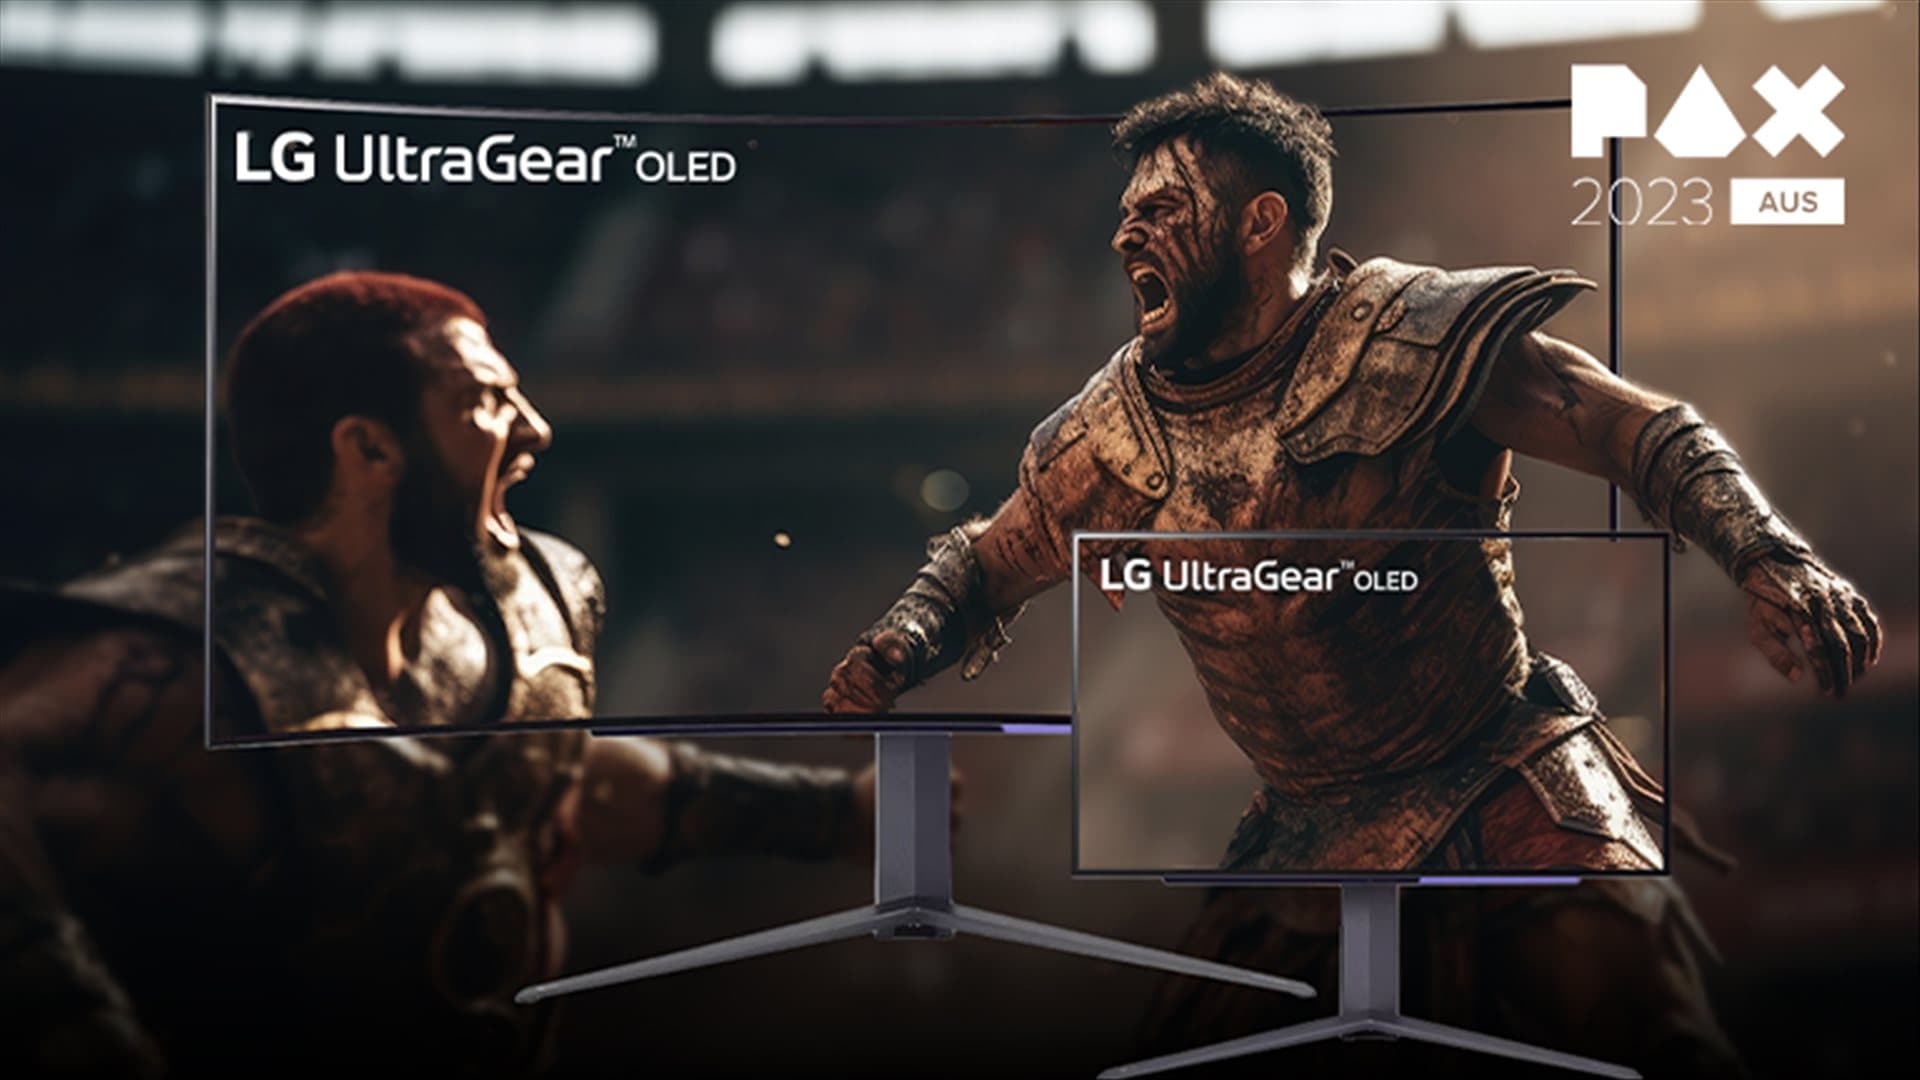 LG Electronics Showcases Next-Gen Gaming Monitors and OLED Flex TV at PAX 2023 in Australia